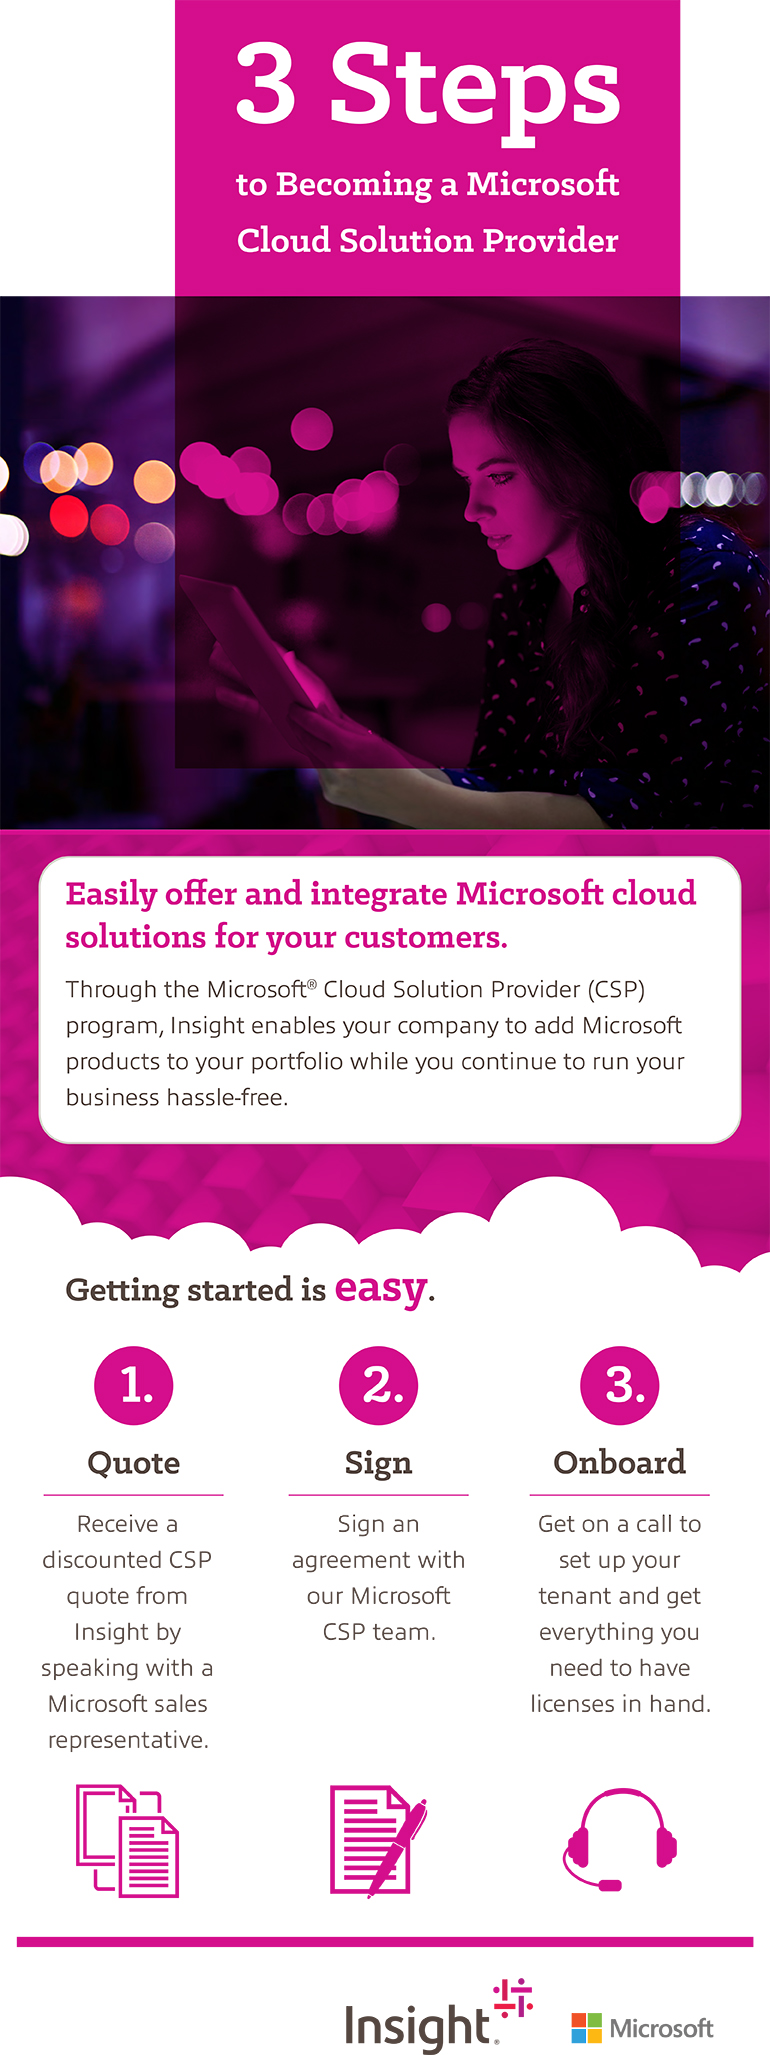 3 Steps to Becoming a Microsoft Cloud Solution Provider